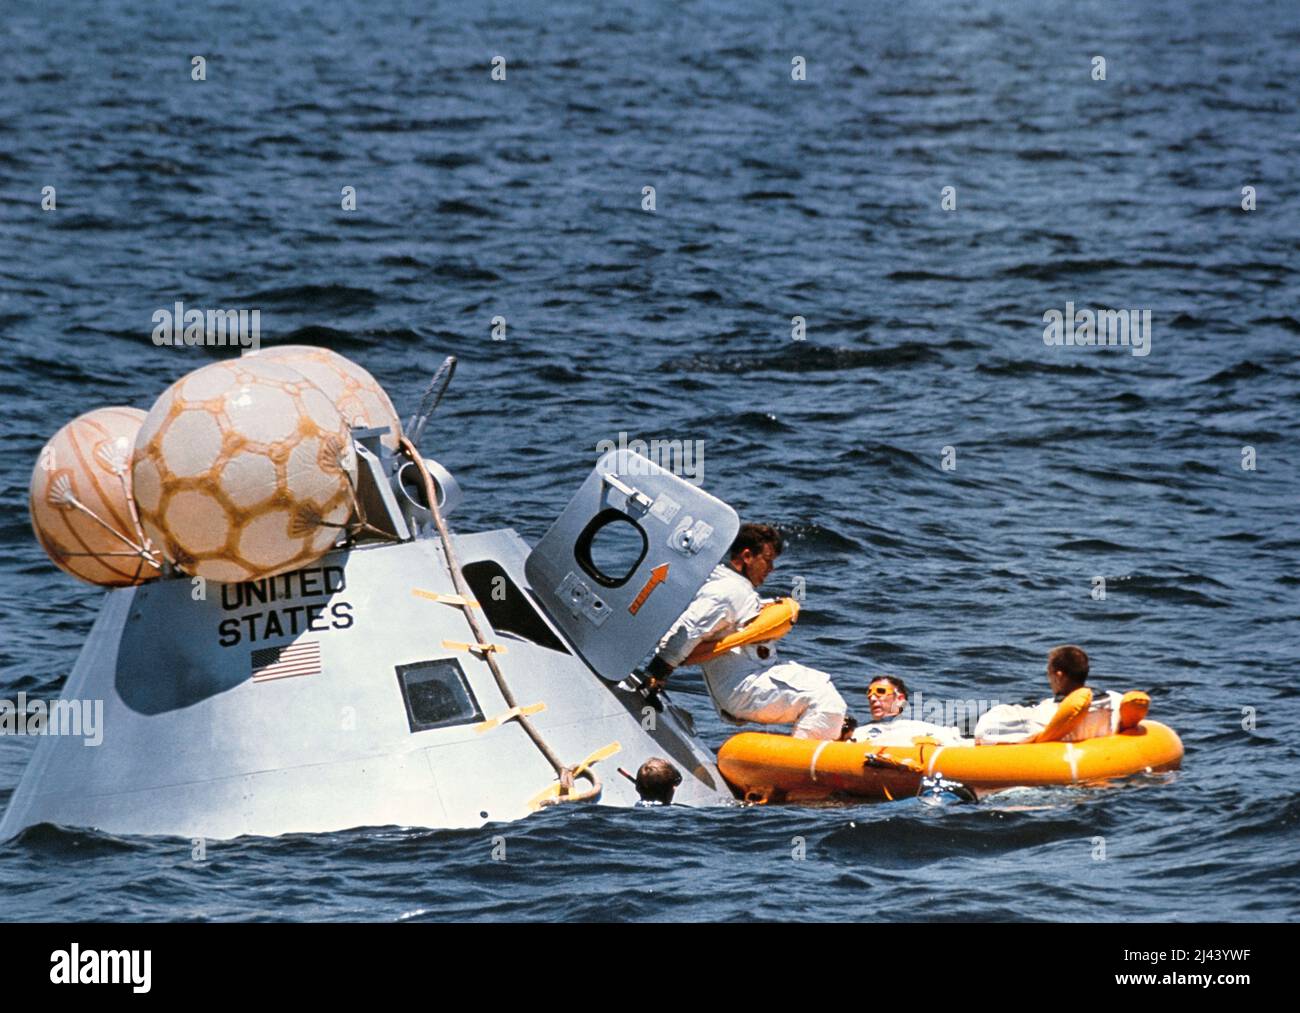 The prime crew of the first manned Apollo mission participating in water egress training in the Gulf of Mexico. Left to right, are astronauts Walter Schirra (stepping into life raft), Donn Eisele, and Walter Cunningham. Stock Photo